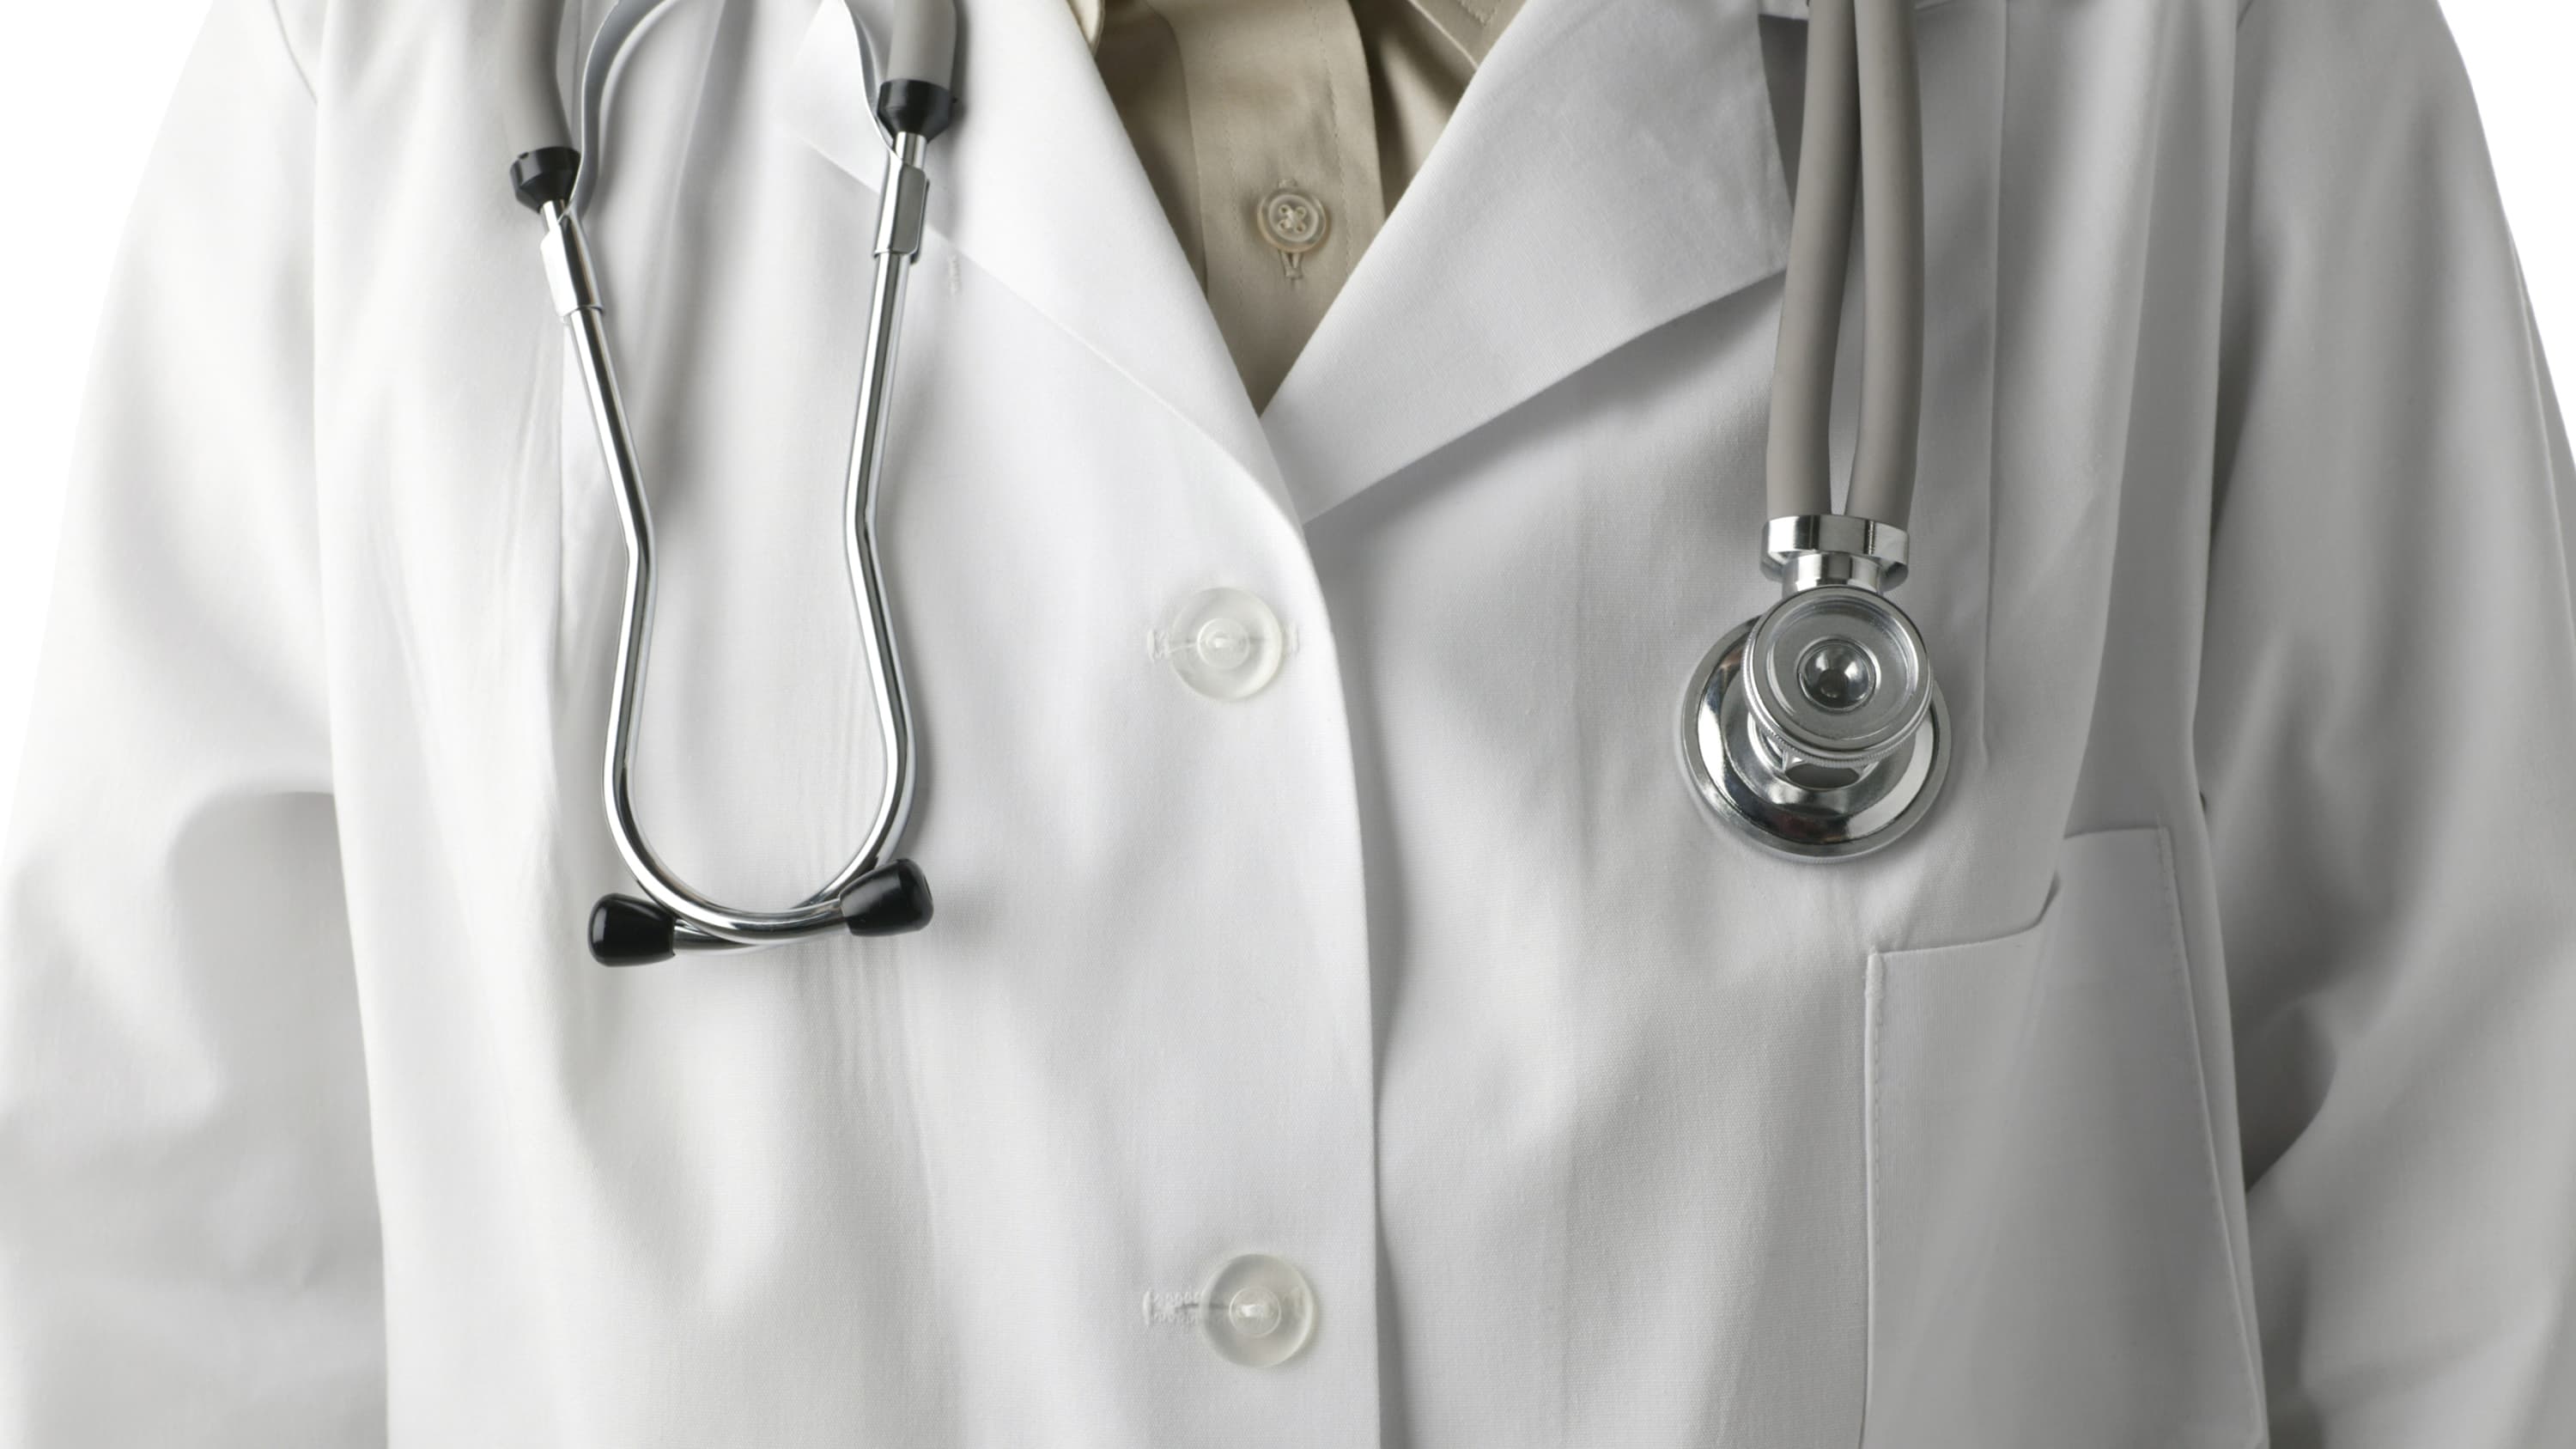 A close up of a doctor's coat is shown.